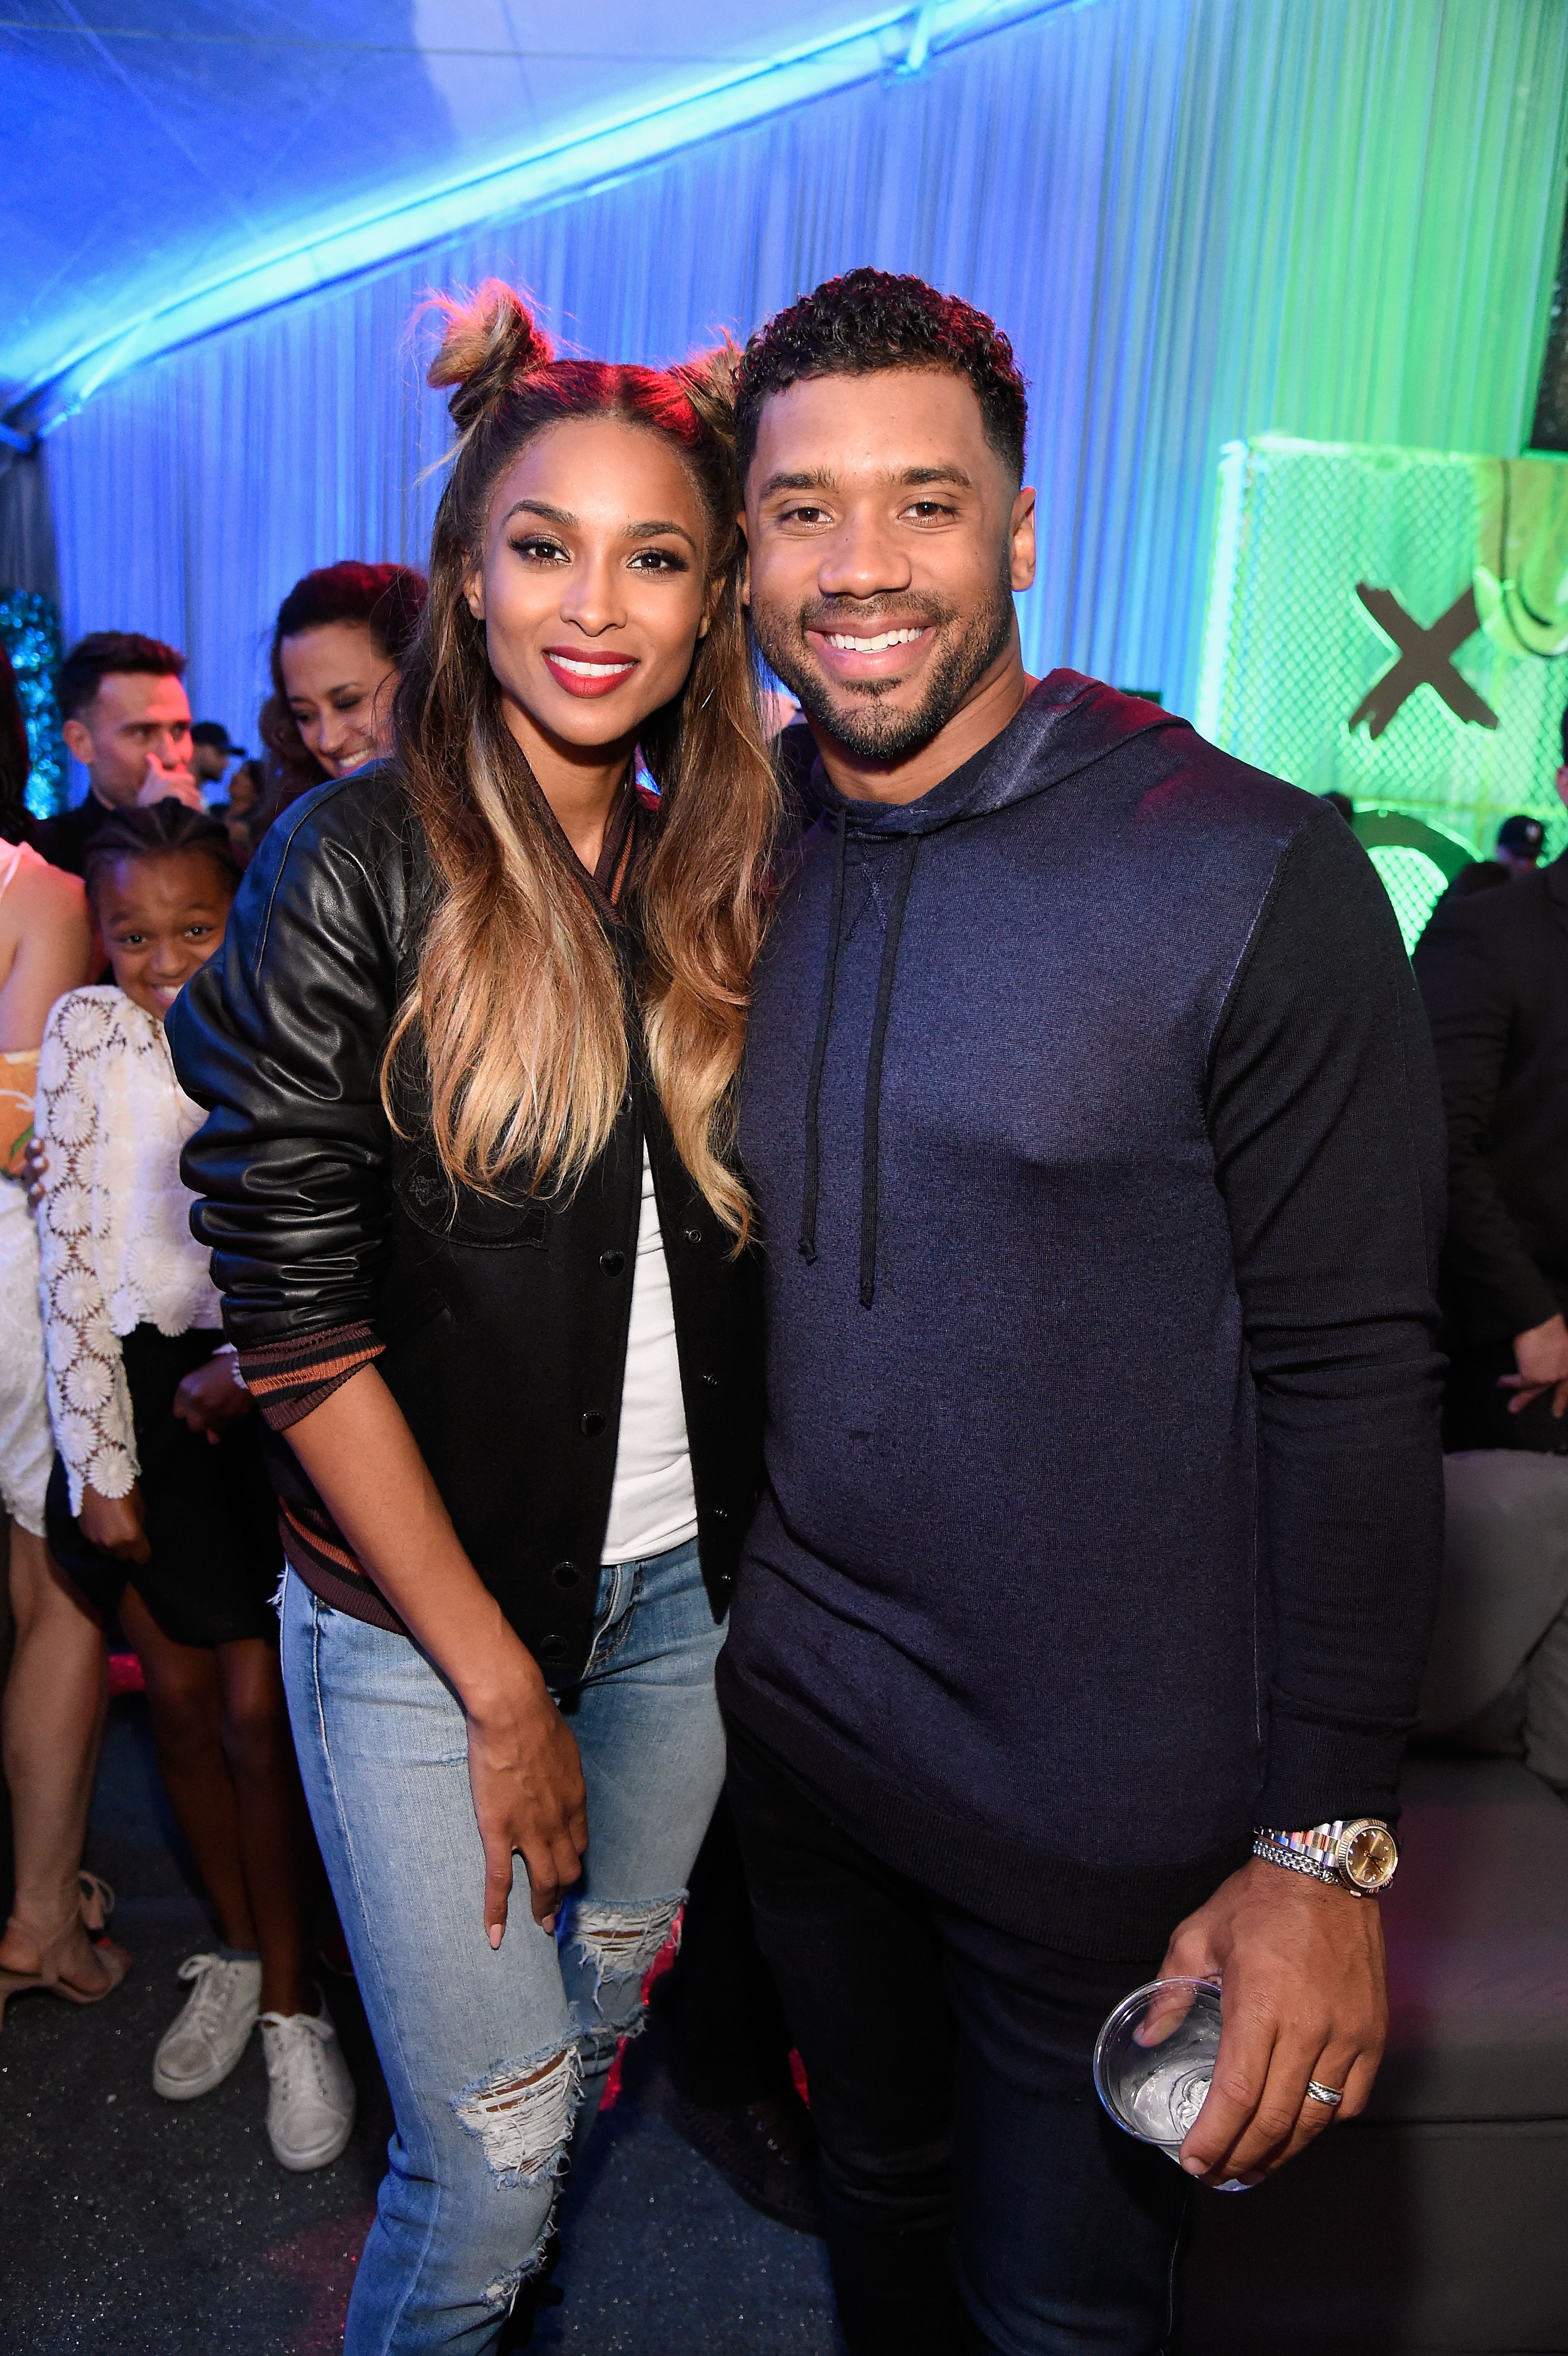 Ciara and football player Russell Wilson attend the Nickelodeon Kids' Choice Sports Awards in July 2016 | Photo: Getty Images